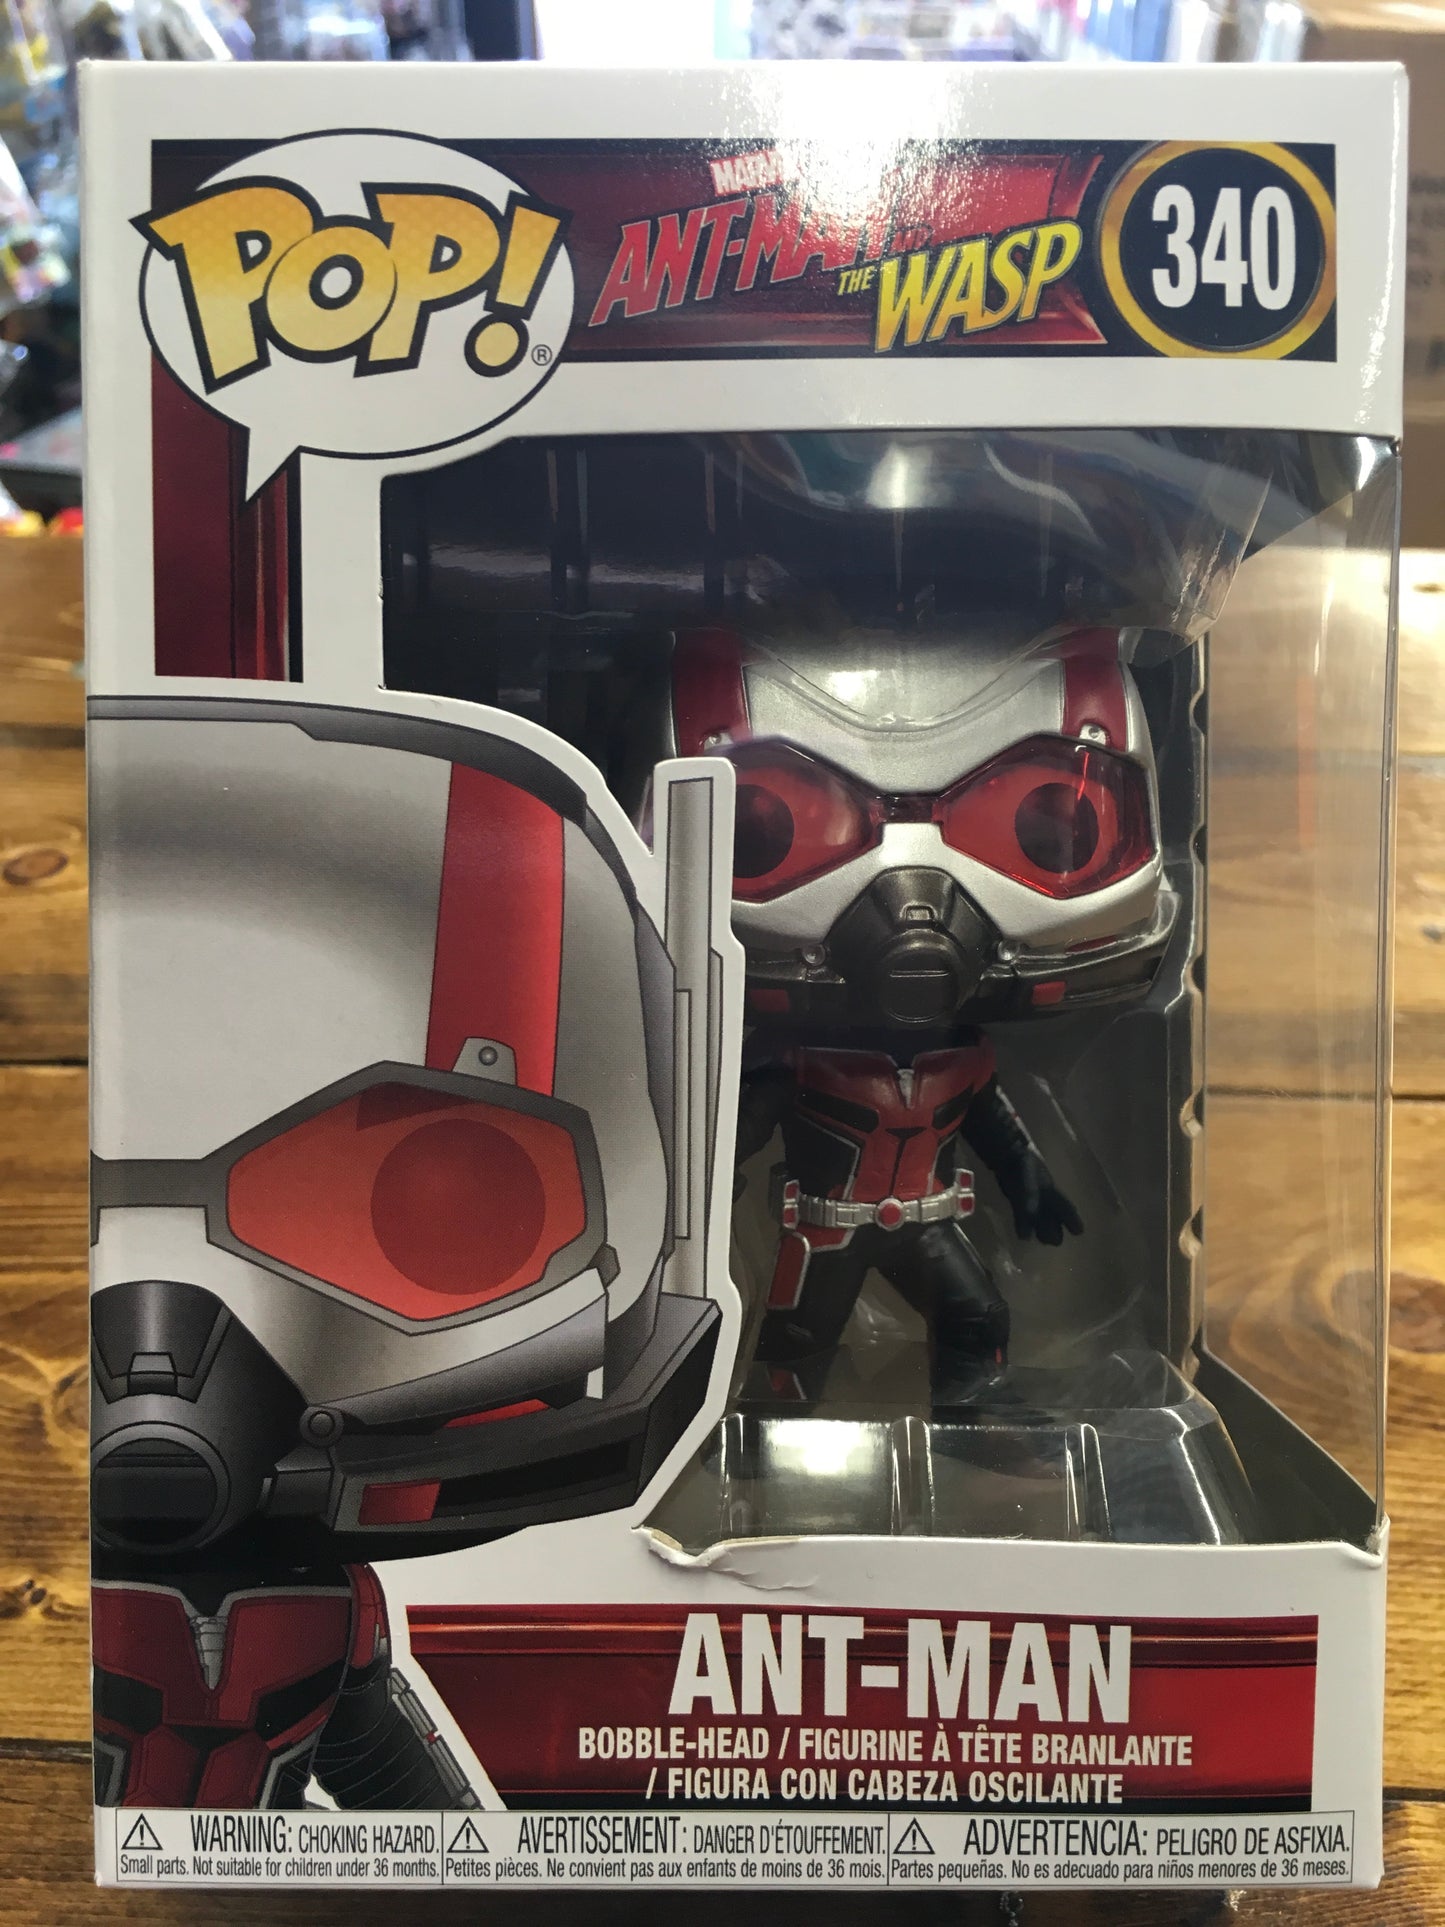 Ant-Man and the Wasp Ant-Man #340 Funko Pop! Vinyl Marvel